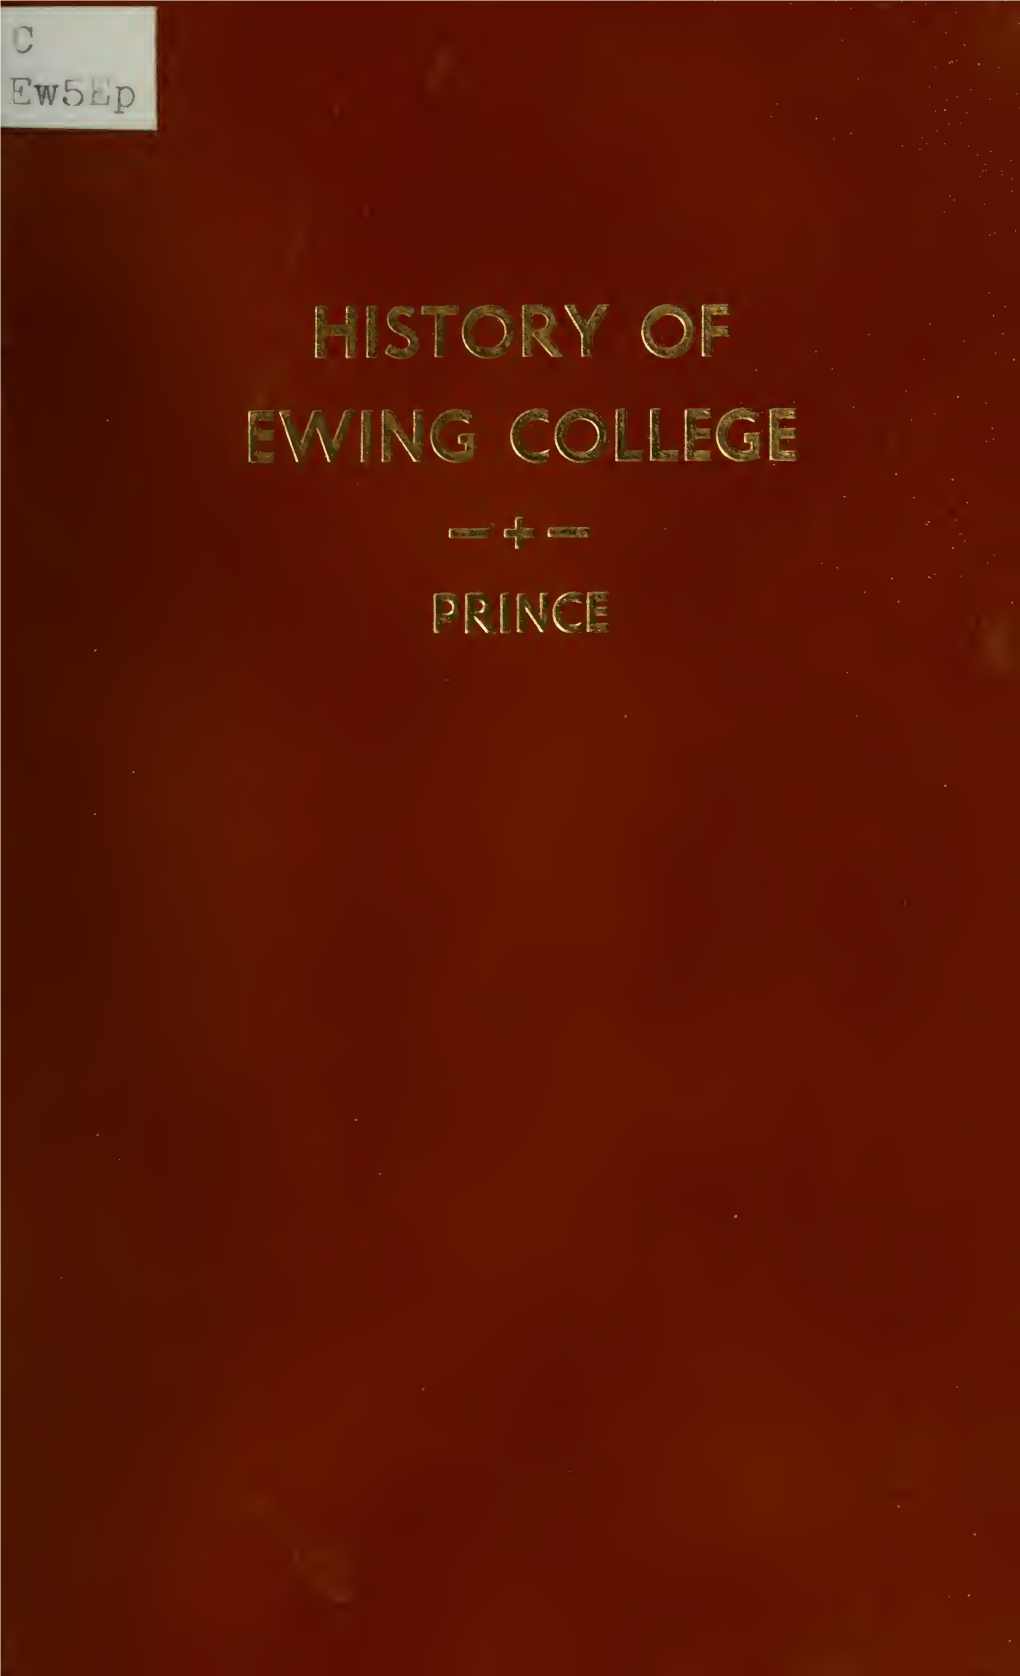 History of EWING COLLEGE